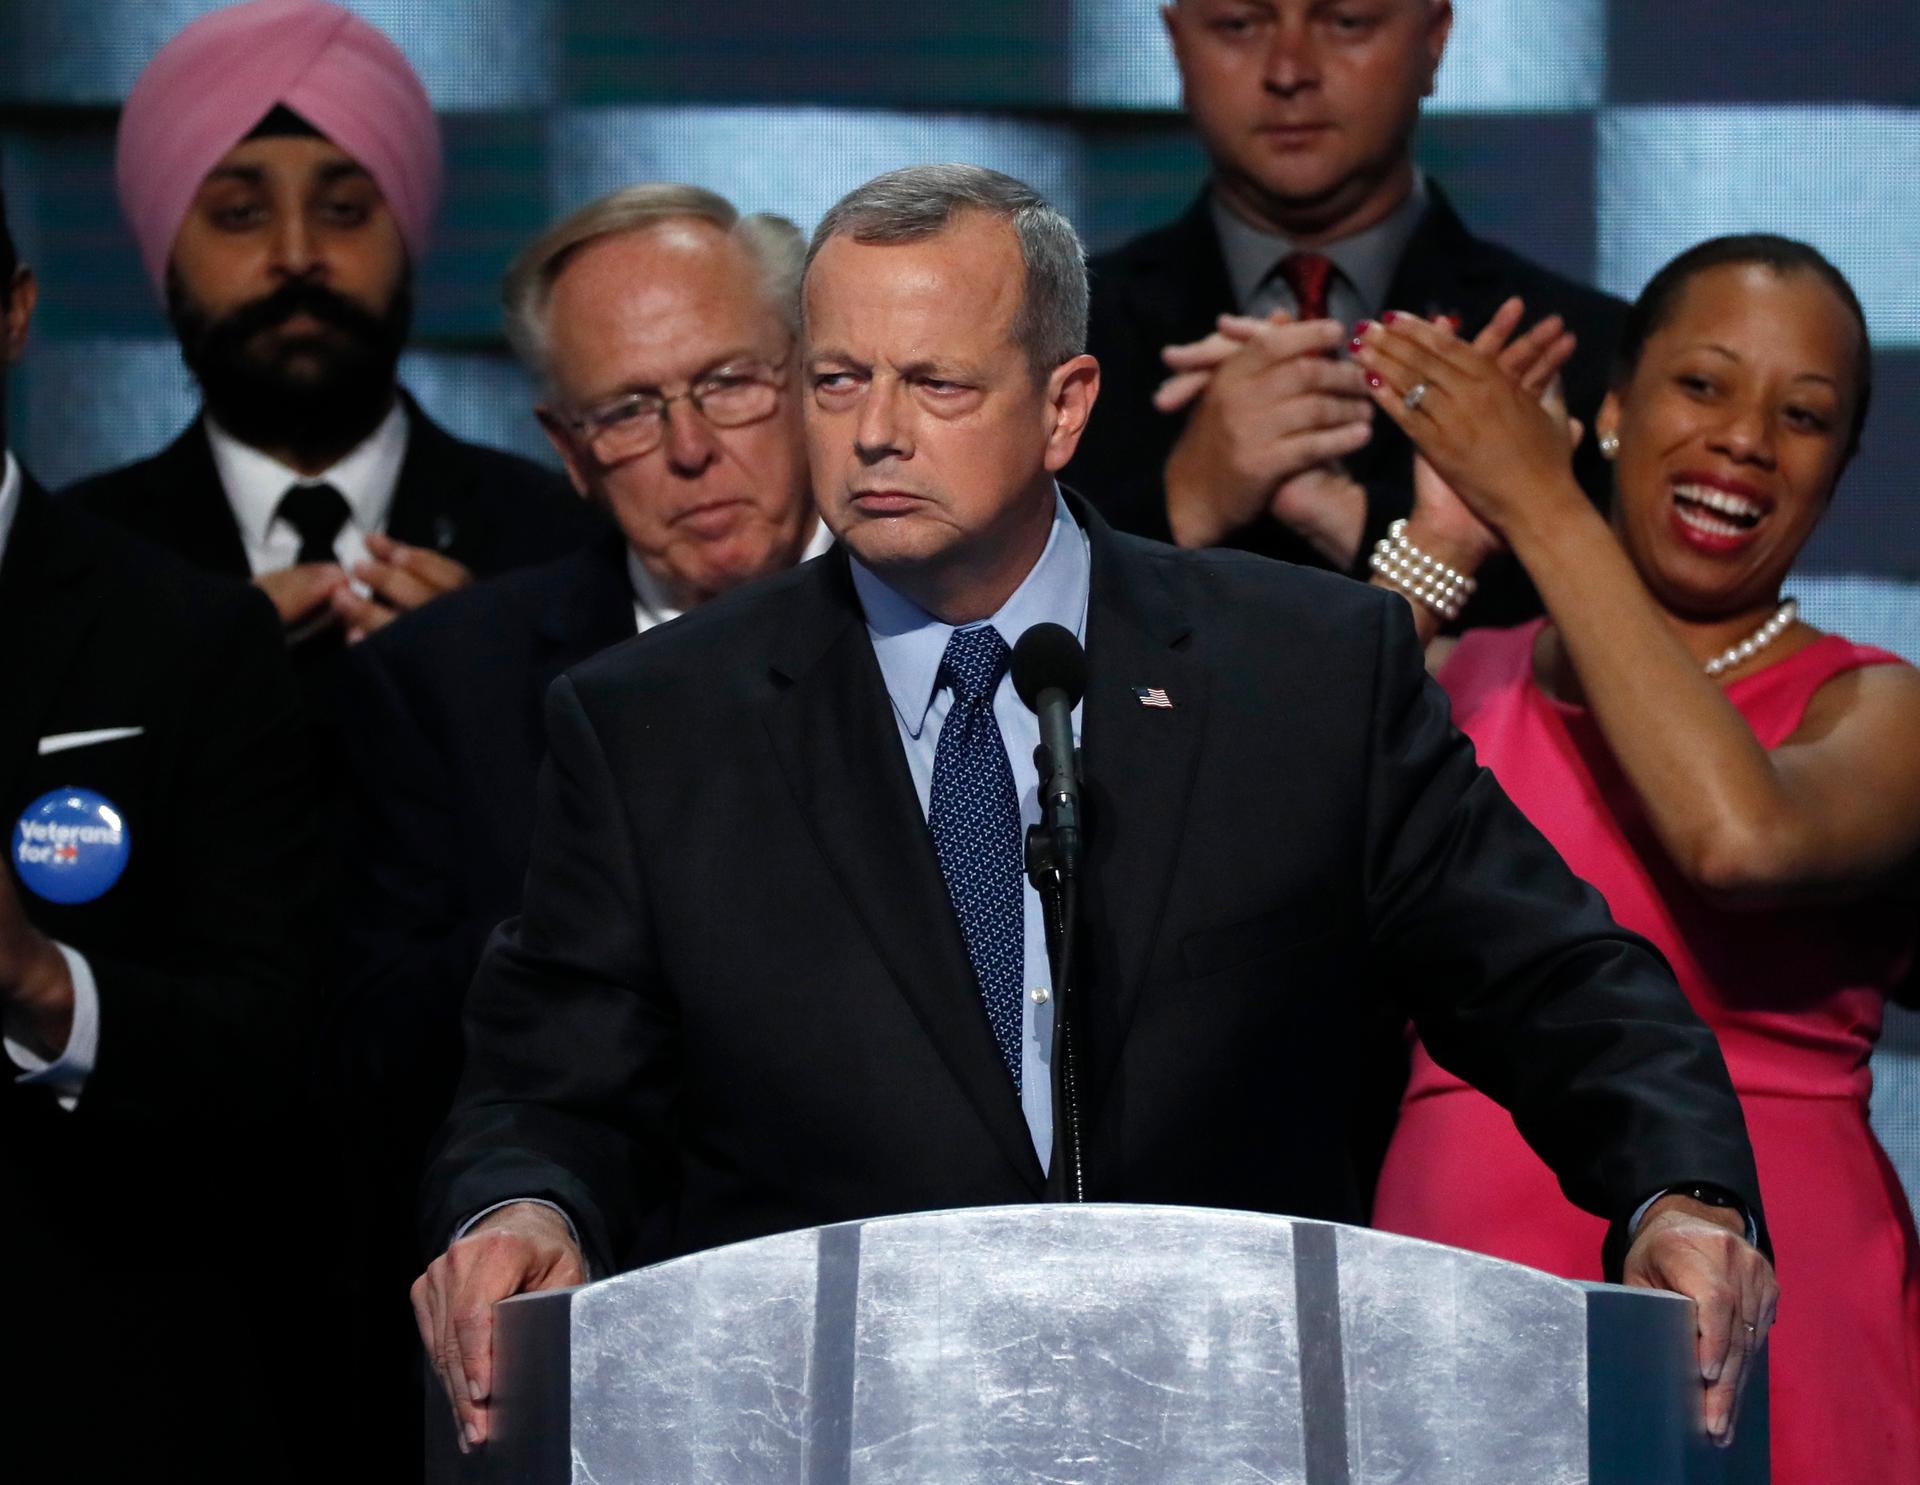 Retired US Marine General John Allen speaks during the final night of the Democratic National Convention in Philadelphia, Pennsylvania, July 28, 2016.